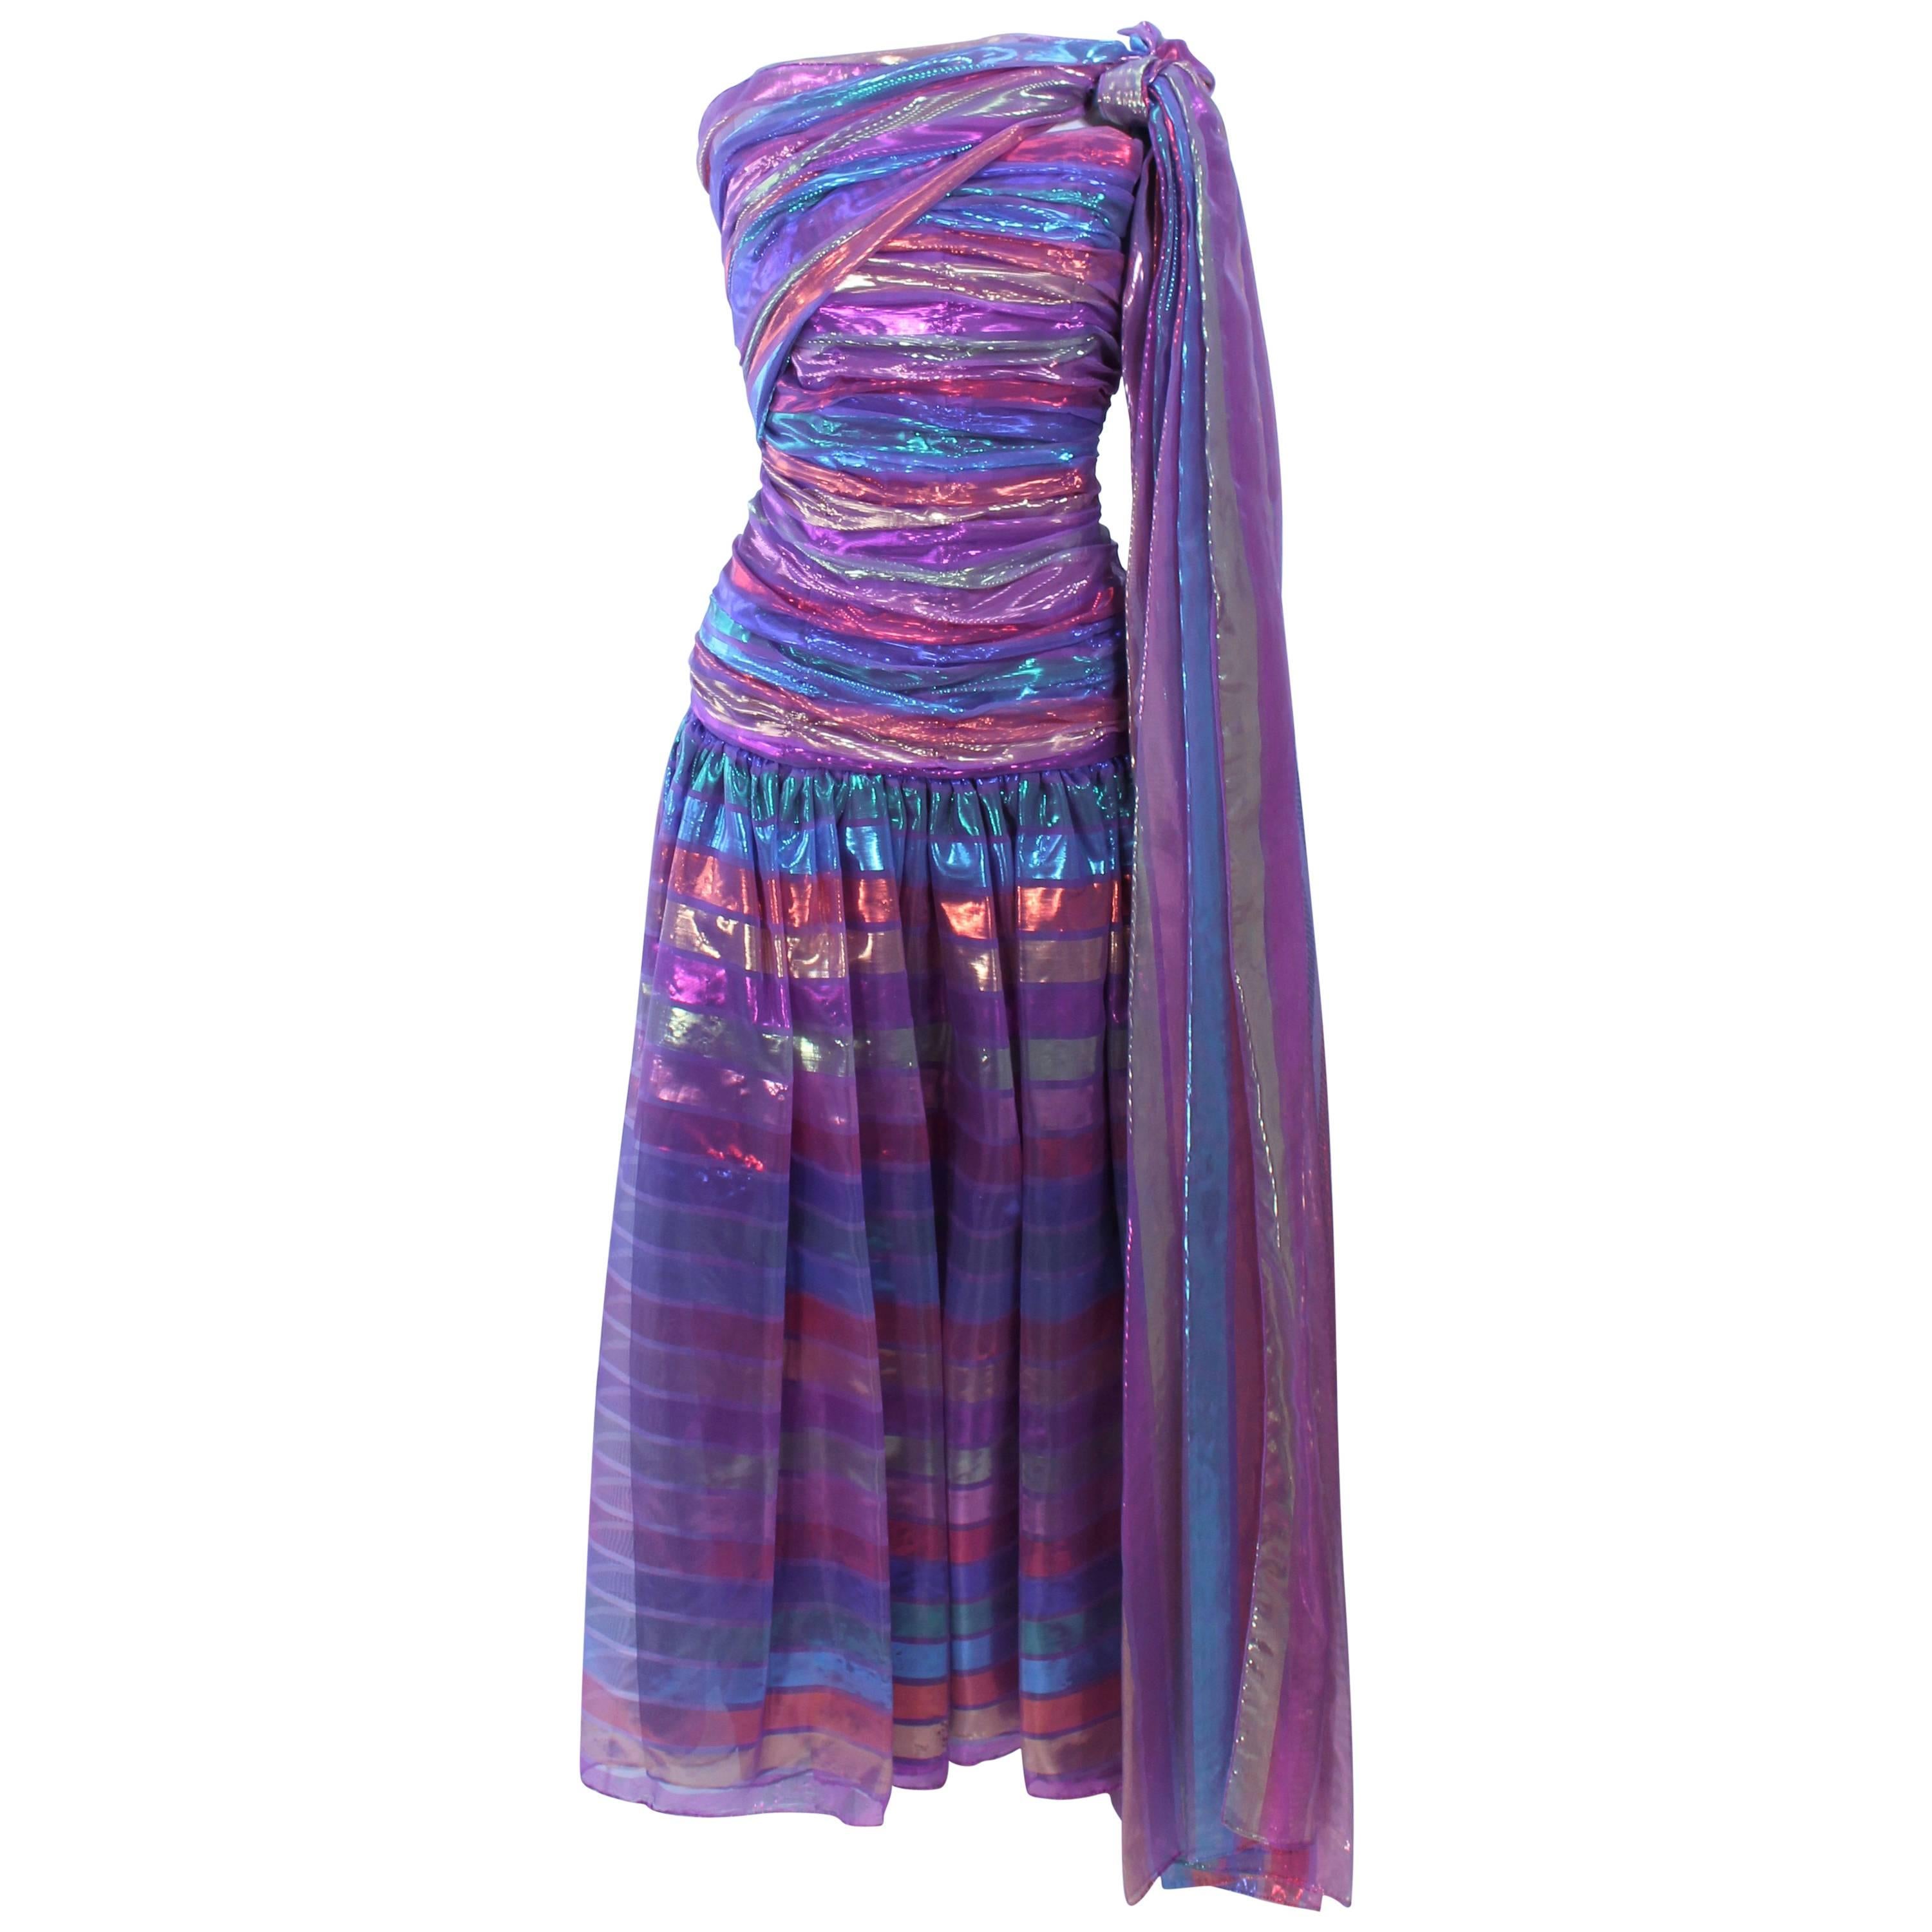 VICTOR COSTA 1970's Iridescent Rainbow Lame Gown with Drape Size 6 8